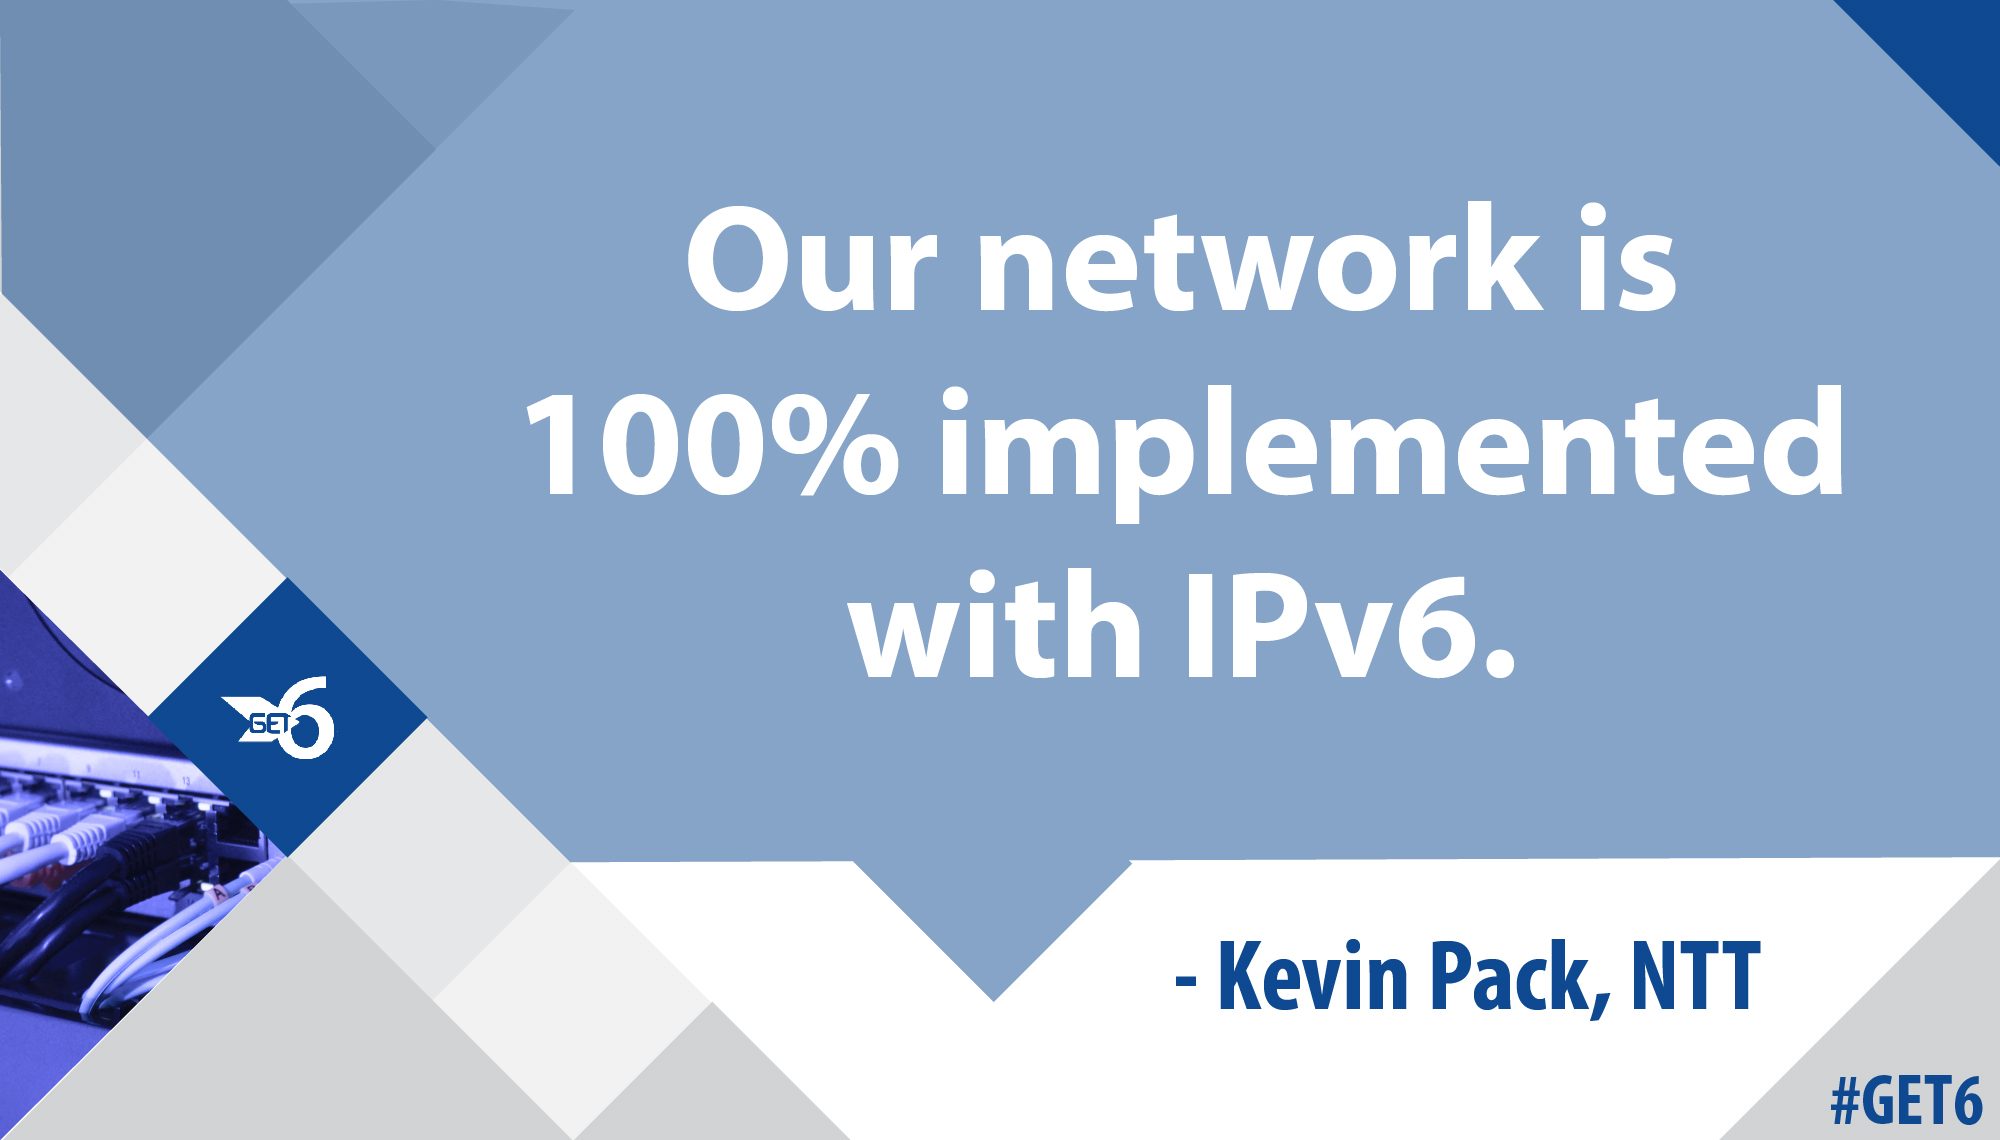 &ldquo;Our network is 100% implemented with IPv6.&rdquo;